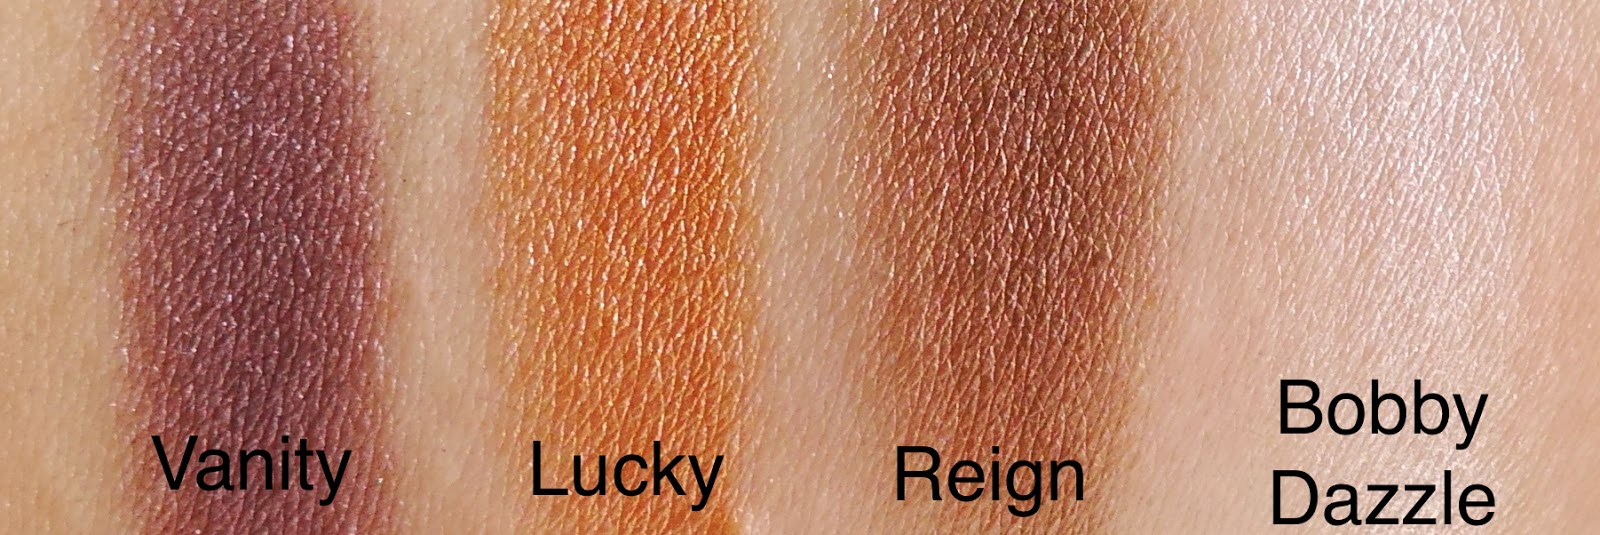 Urban Decay Vice 3 Palette review swatch